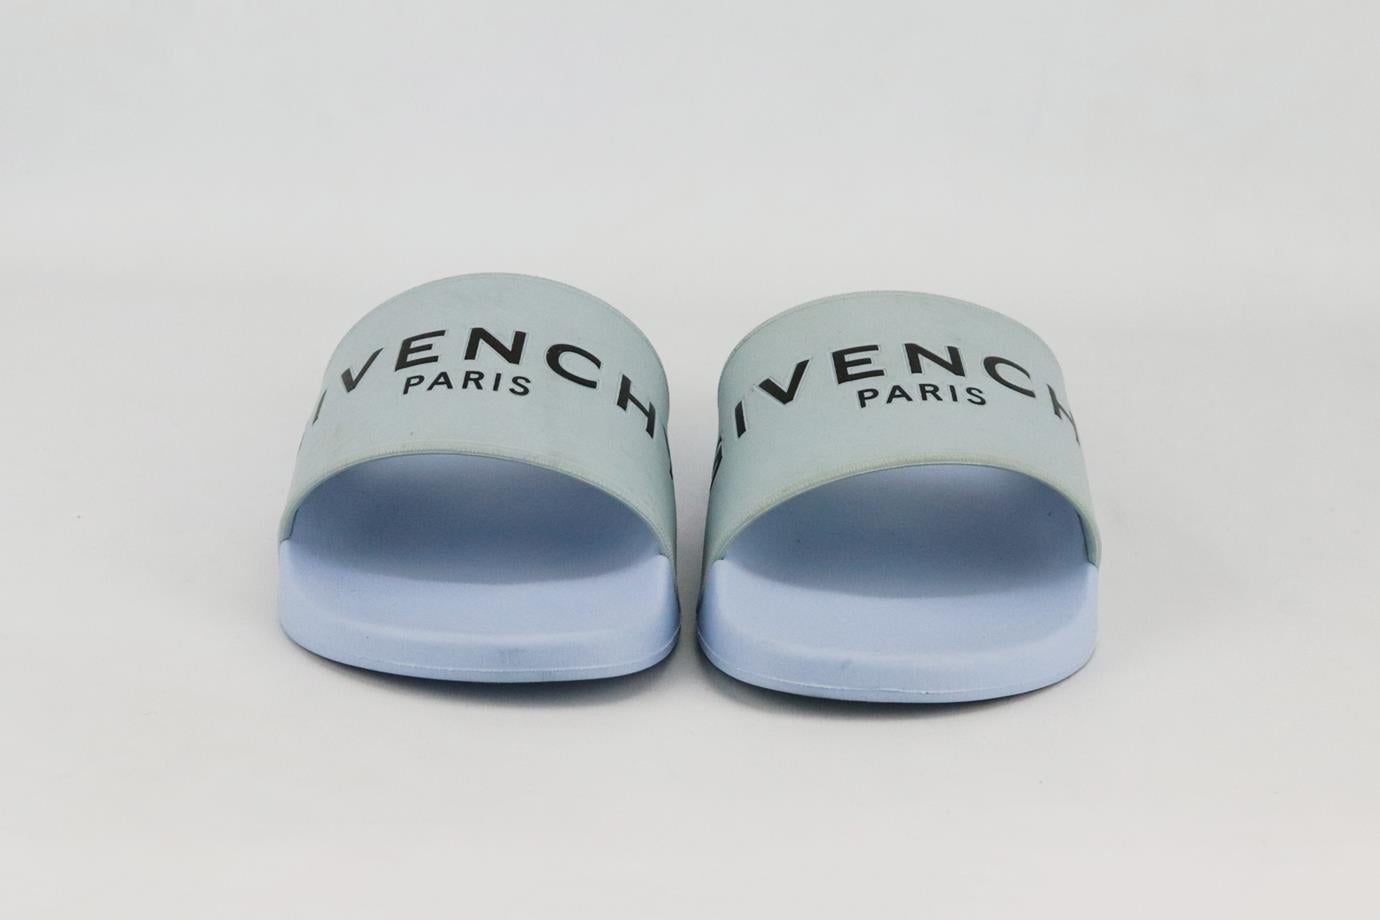 Givenchy logo print rubber slides. Made from light-blue and black rubber with comfortable molded footbeds and stamped with the house’s logo in raised letting. Yellow and black. Slips on. Does not come with box or dustbag. Size: EU 39 (UK 6, US 9).